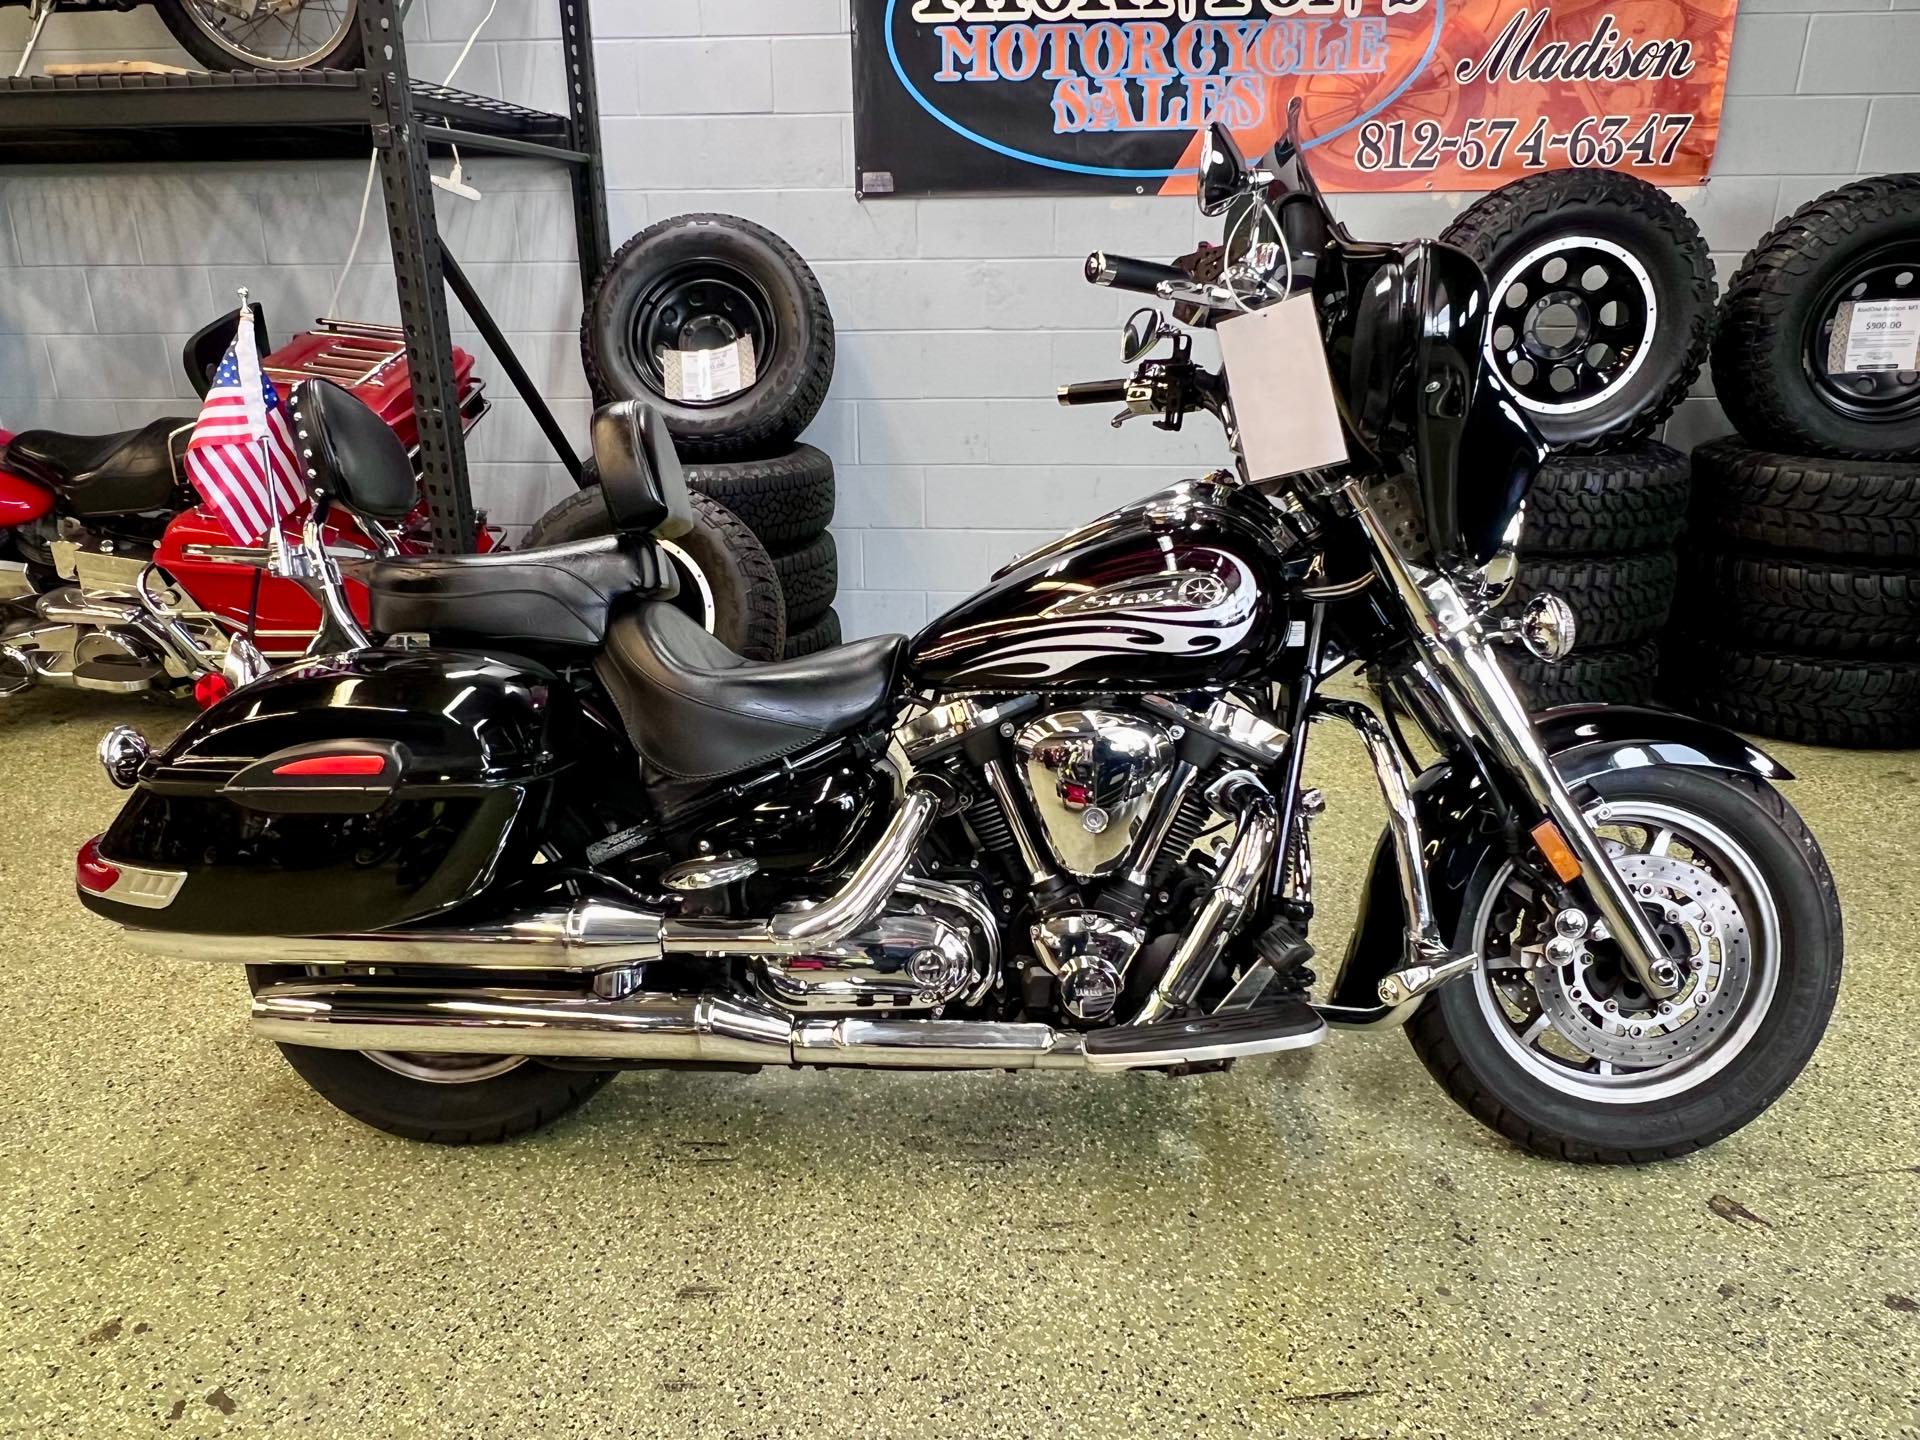 2010 Yamaha Road Star at Thornton's Motorcycle Sales, Madison, IN